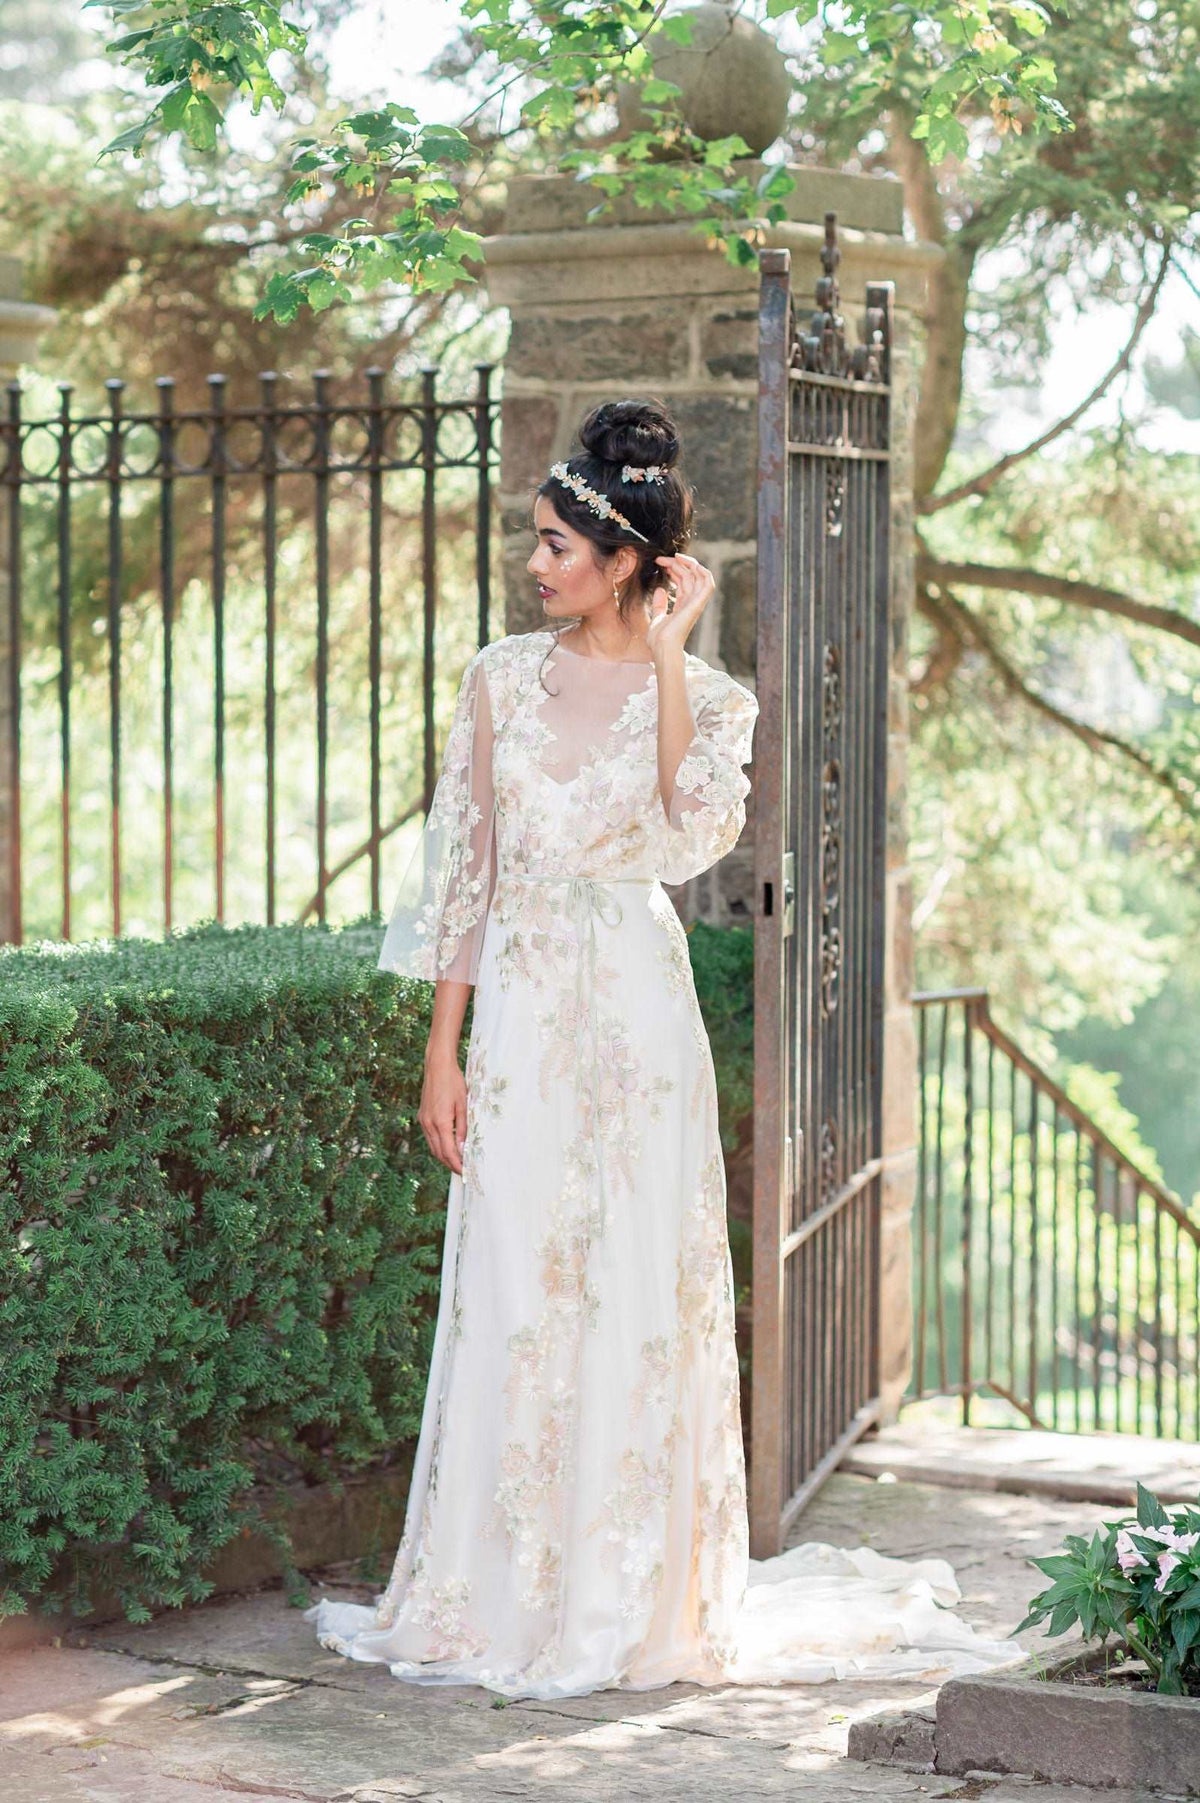 Floral wedding dress with poet sleeves. Blush, pale green and lavender. Handmade by Catherine Langlois, Toronto, Canada